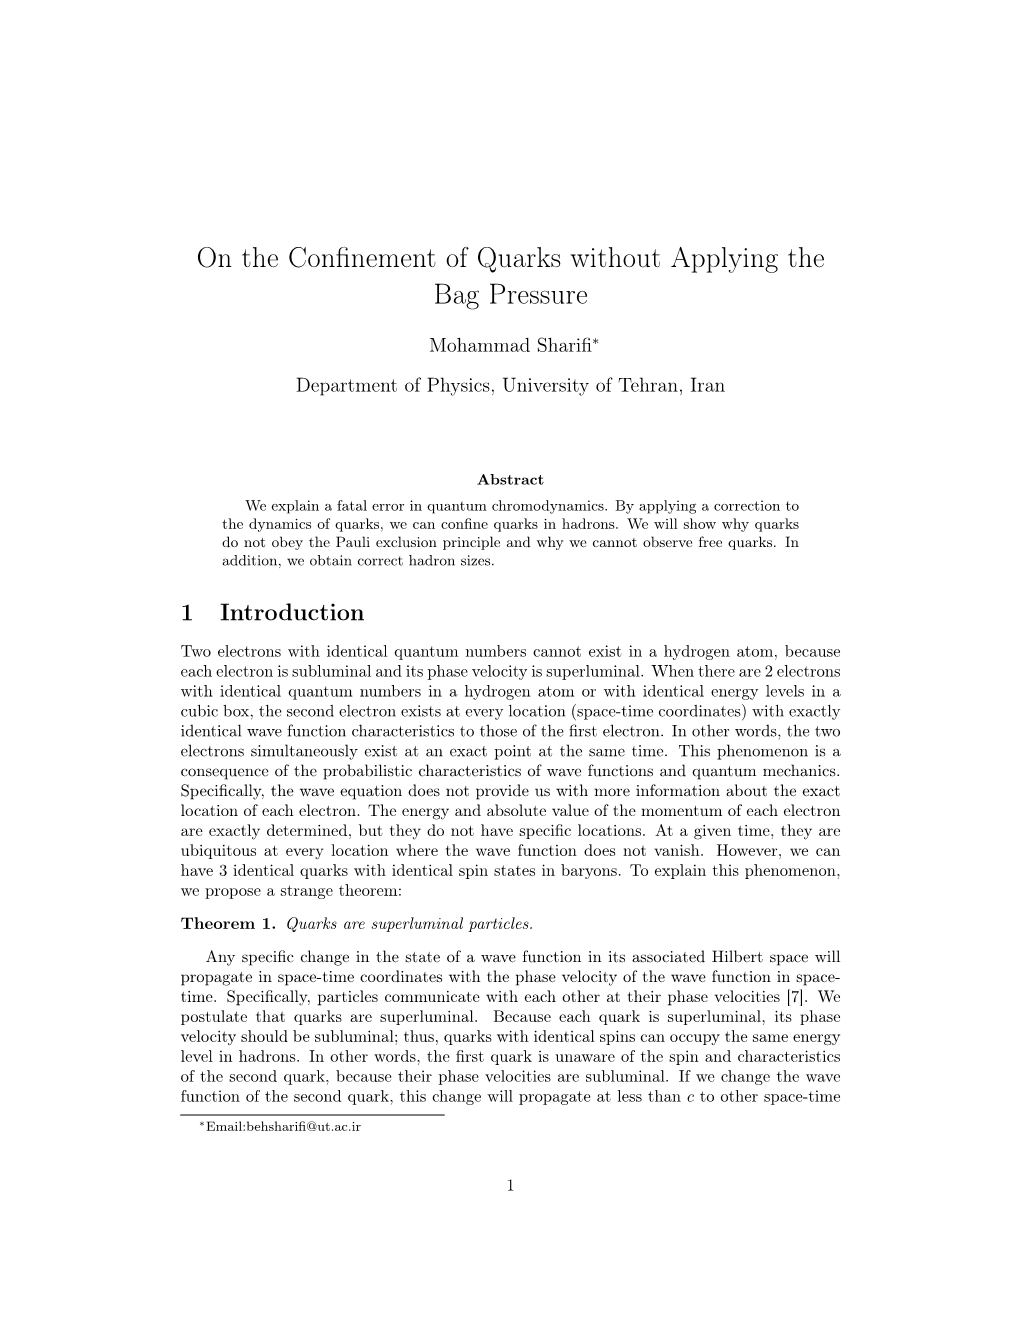 On the Confinement of Quarks Without Applying the Bag Pressure